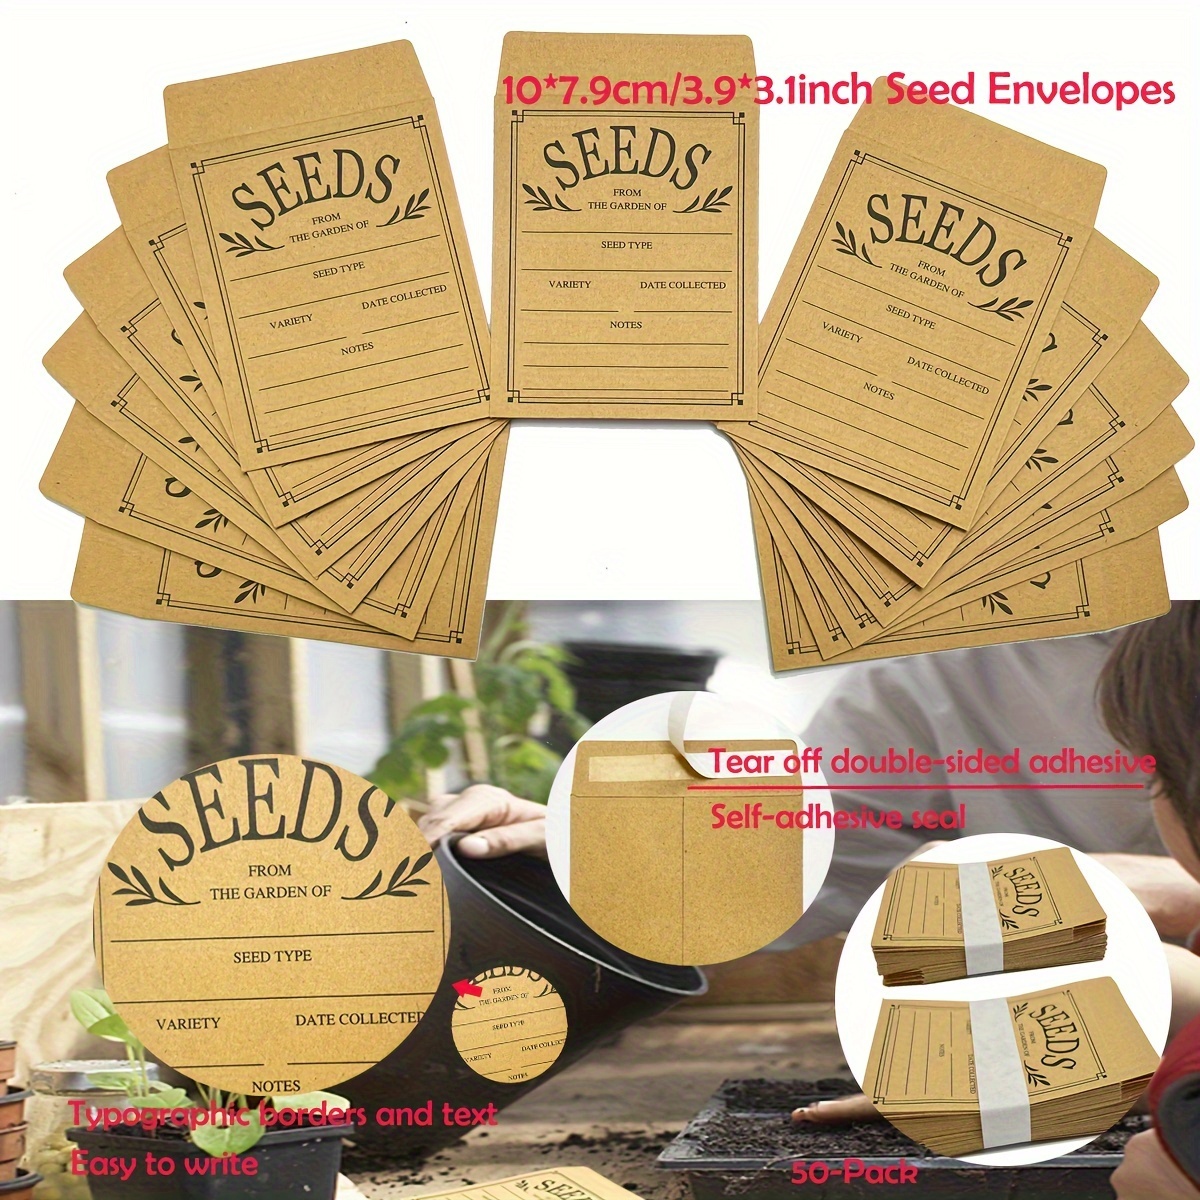 200Pcs Seed Envelopes, Seed Envelopes Resealable Small Seed Packets  Envelopes Brown Paper Seed Envelopes with Printing, 3.1x4.7 Inch Self  Sealing Seed